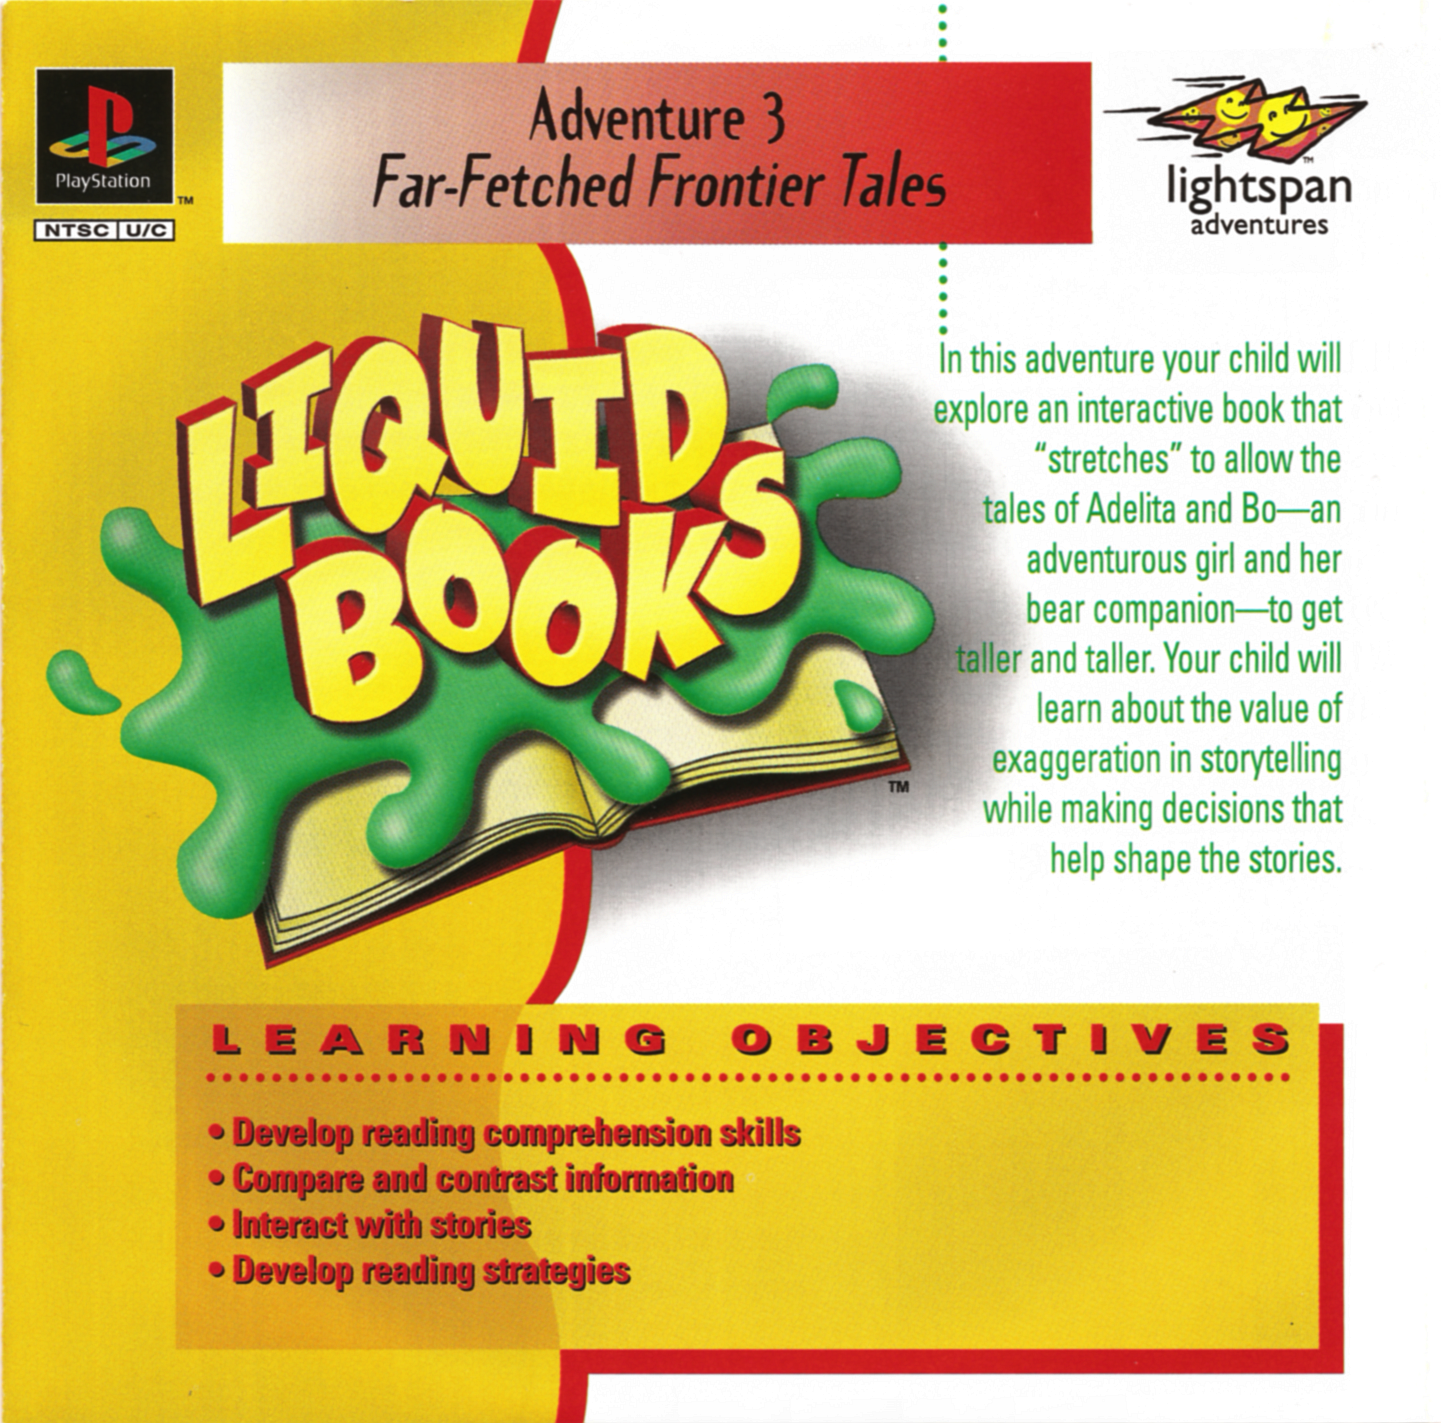 Further fetched. Lightspan Adventures ps1. Предложение с far-fetched. Hermie Hopperhead ps1 PSX Front. Liquid book.